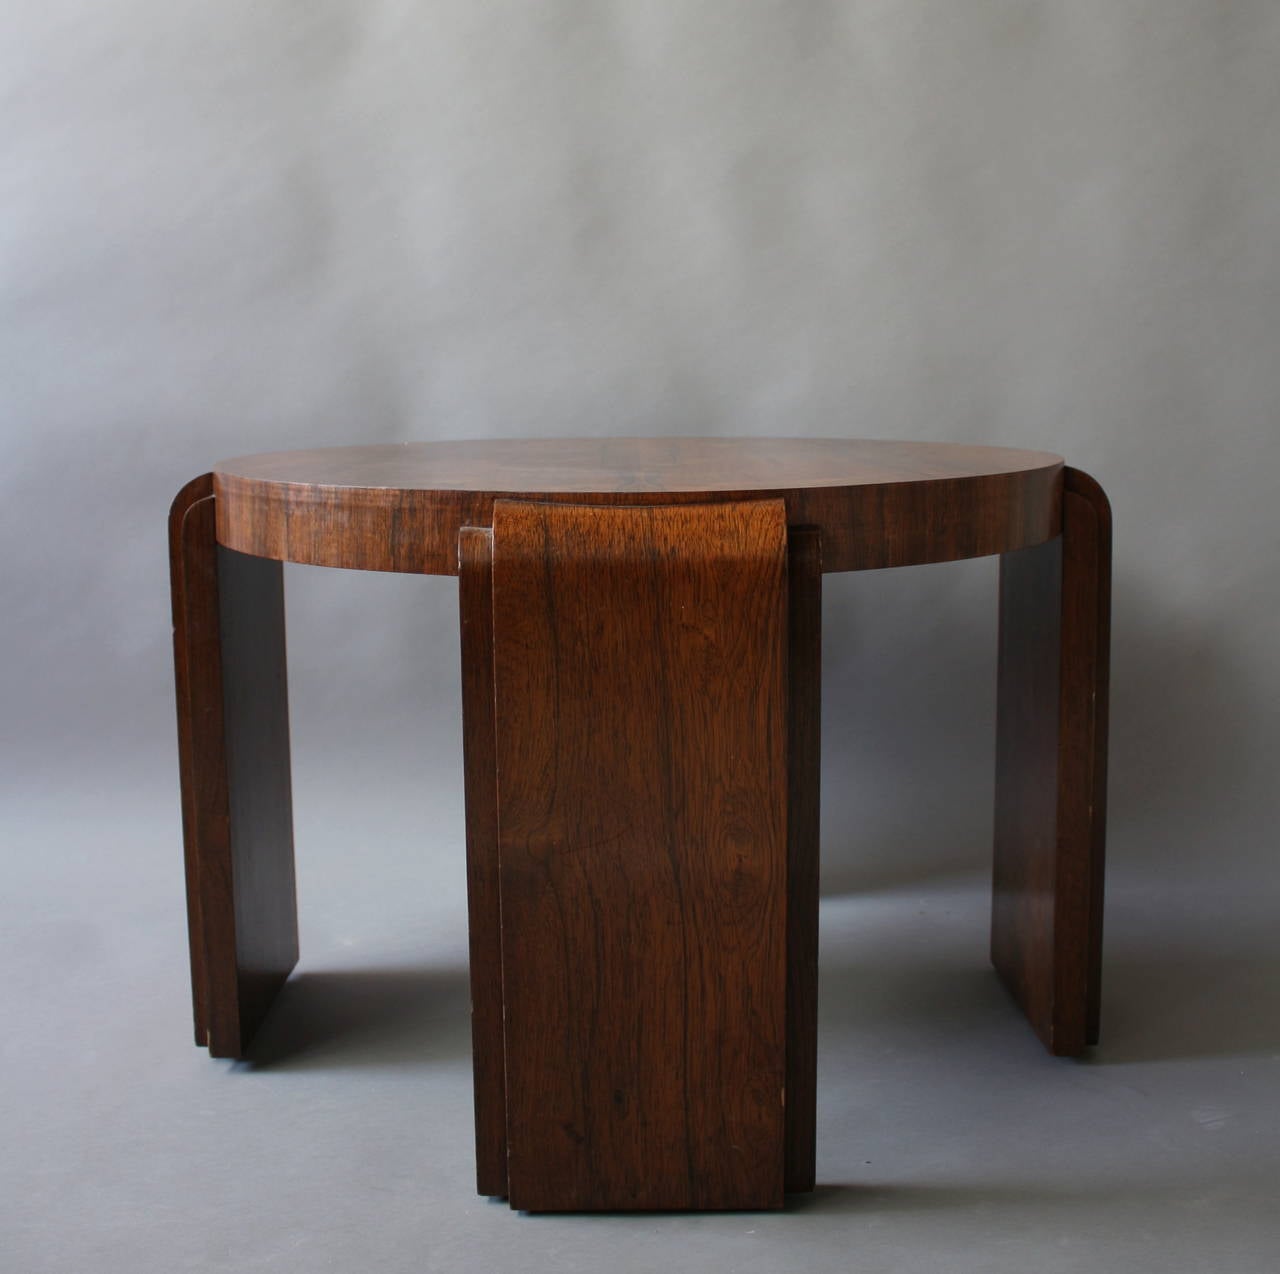 One French Art Deco rosewood gueridon/side table.
Length is 31 3/4